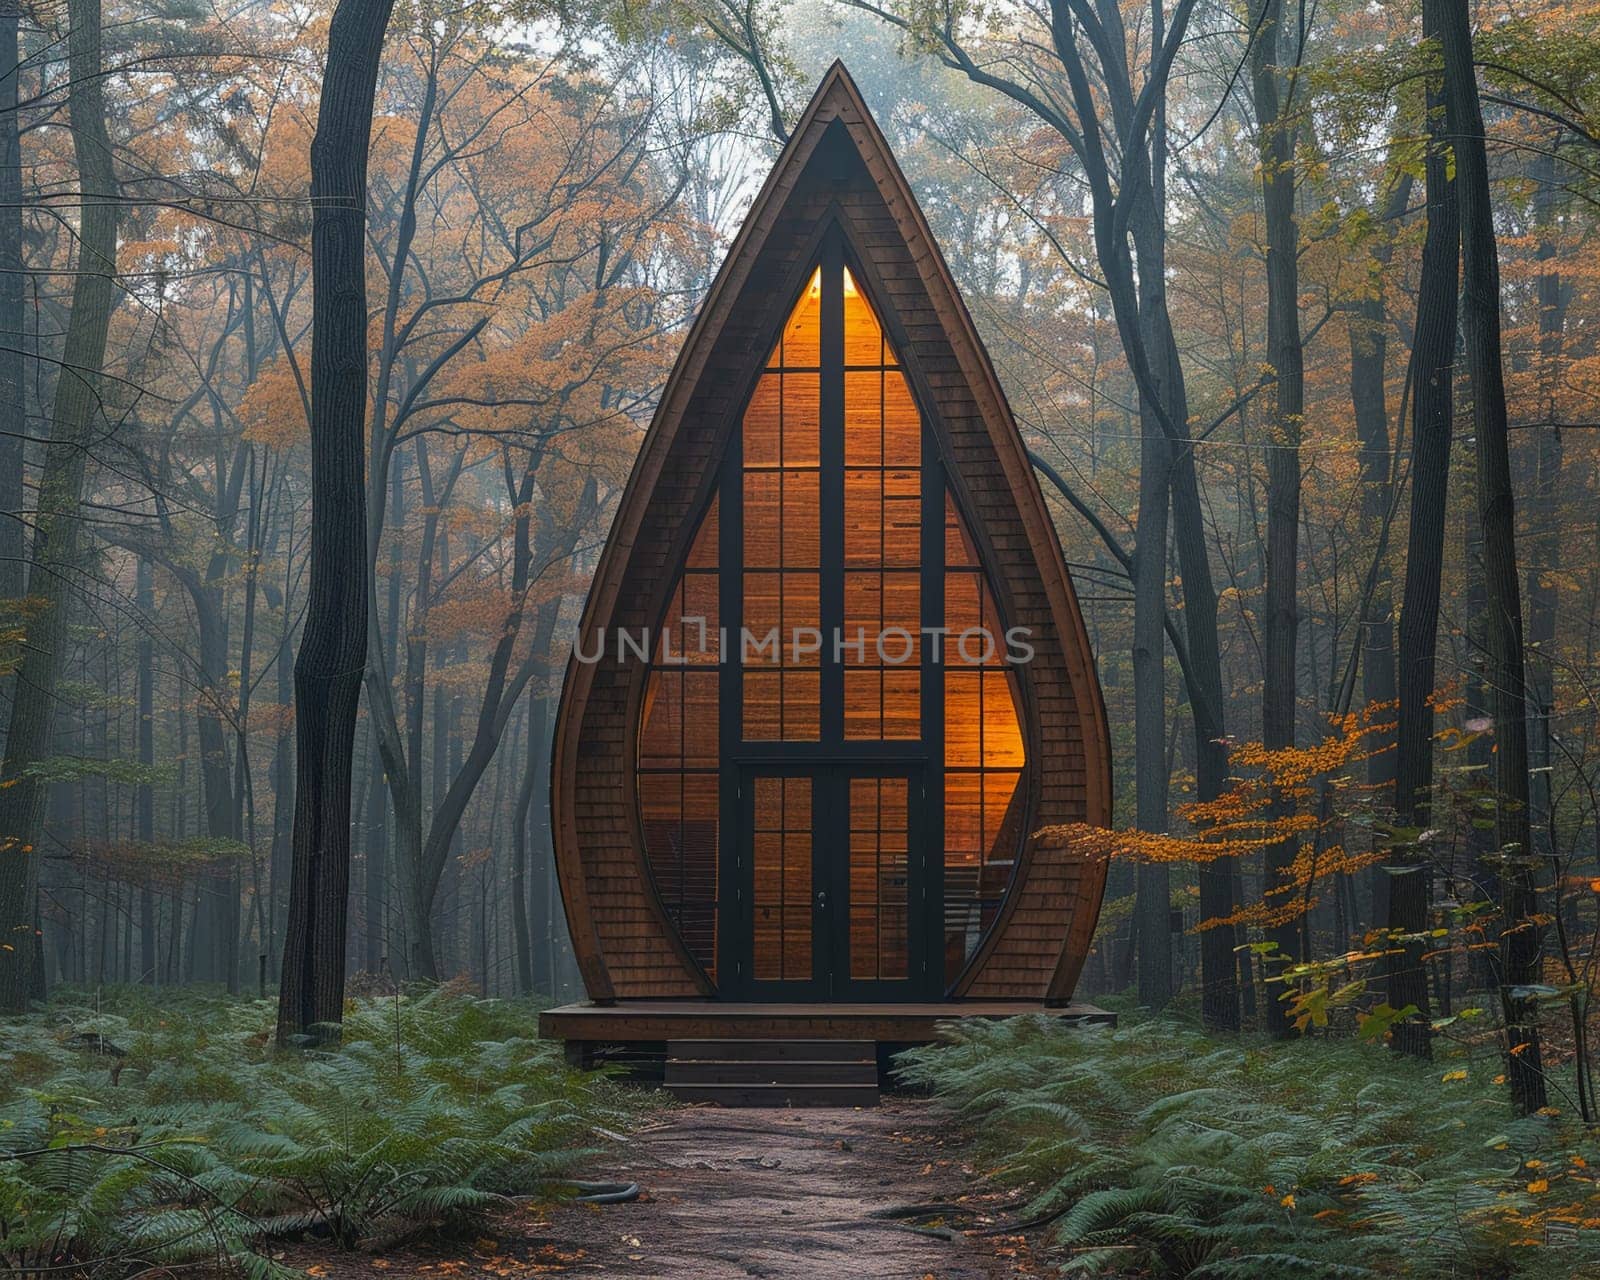 Rustic Wooden Chapel Nestled in Serene Nature by Benzoix